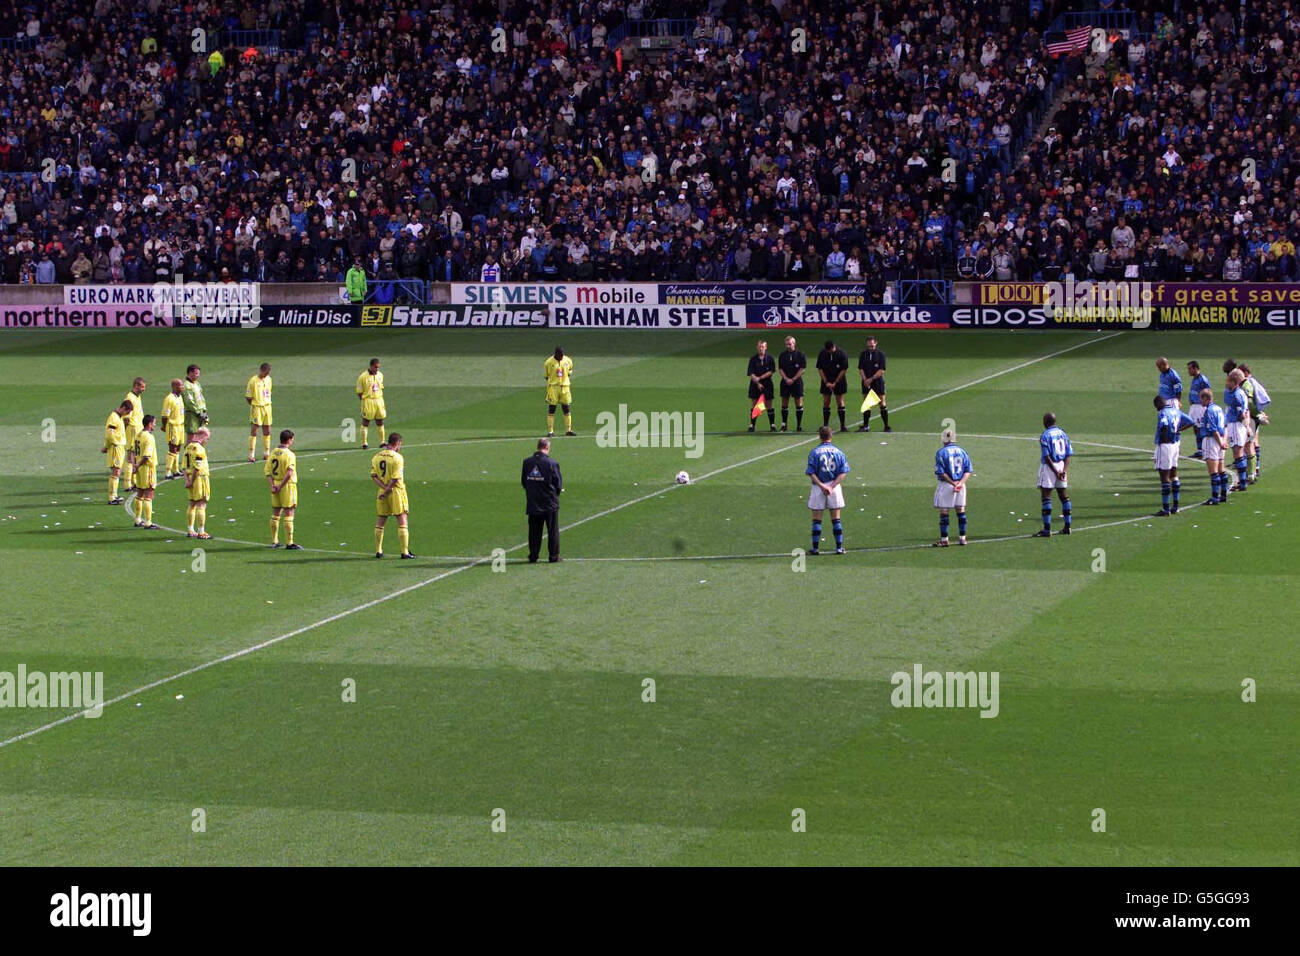 A minute's silence is held before the Nationwide Division One game between Manchester City v Birmingham at Maine Road, Manchester. NO UNOFFICIAL CLUB WEBSITE USE Stock Photo